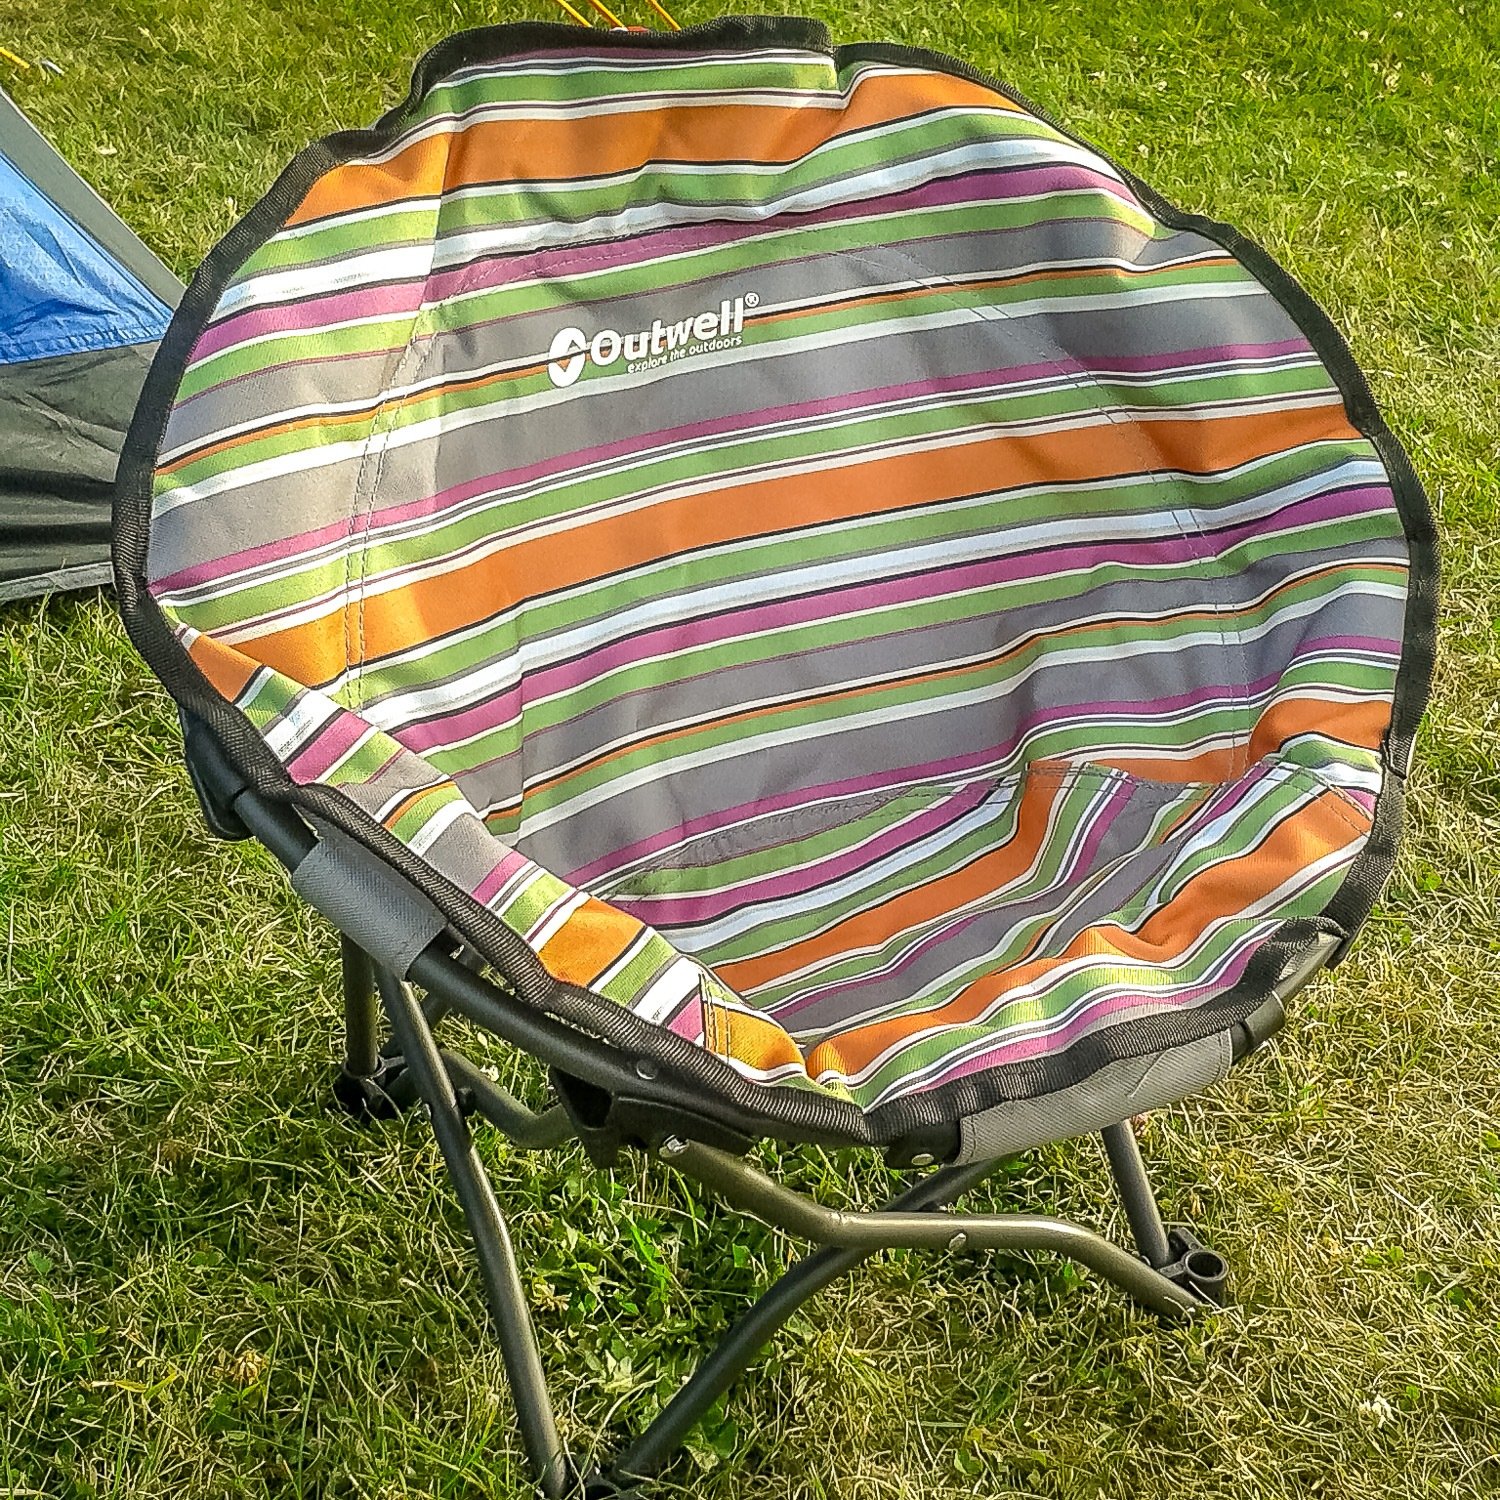 Testing the camping chair